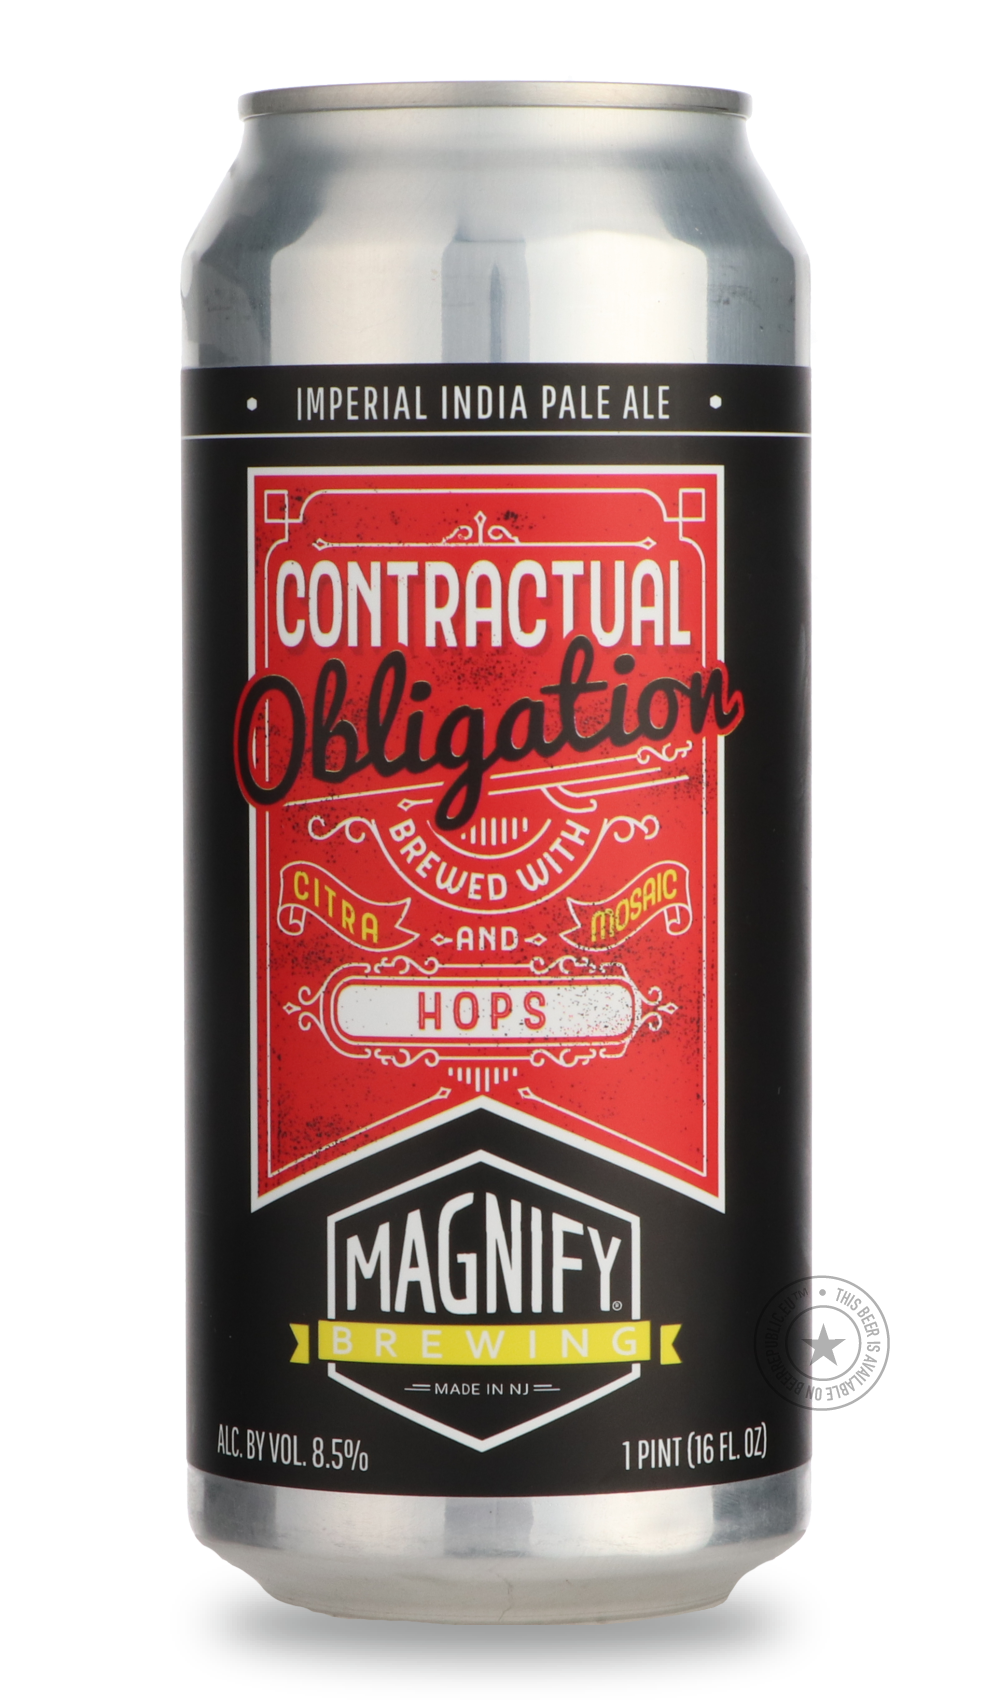 -Magnify- Contractual Obligation-IPA- Only @ Beer Republic - The best online beer store for American & Canadian craft beer - Buy beer online from the USA and Canada - Bier online kopen - Amerikaans bier kopen - Craft beer store - Craft beer kopen - Amerikanisch bier kaufen - Bier online kaufen - Acheter biere online - IPA - Stout - Porter - New England IPA - Hazy IPA - Imperial Stout - Barrel Aged - Barrel Aged Imperial Stout - Brown - Dark beer - Blond - Blonde - Pilsner - Lager - Wheat - Weizen - Amber - 